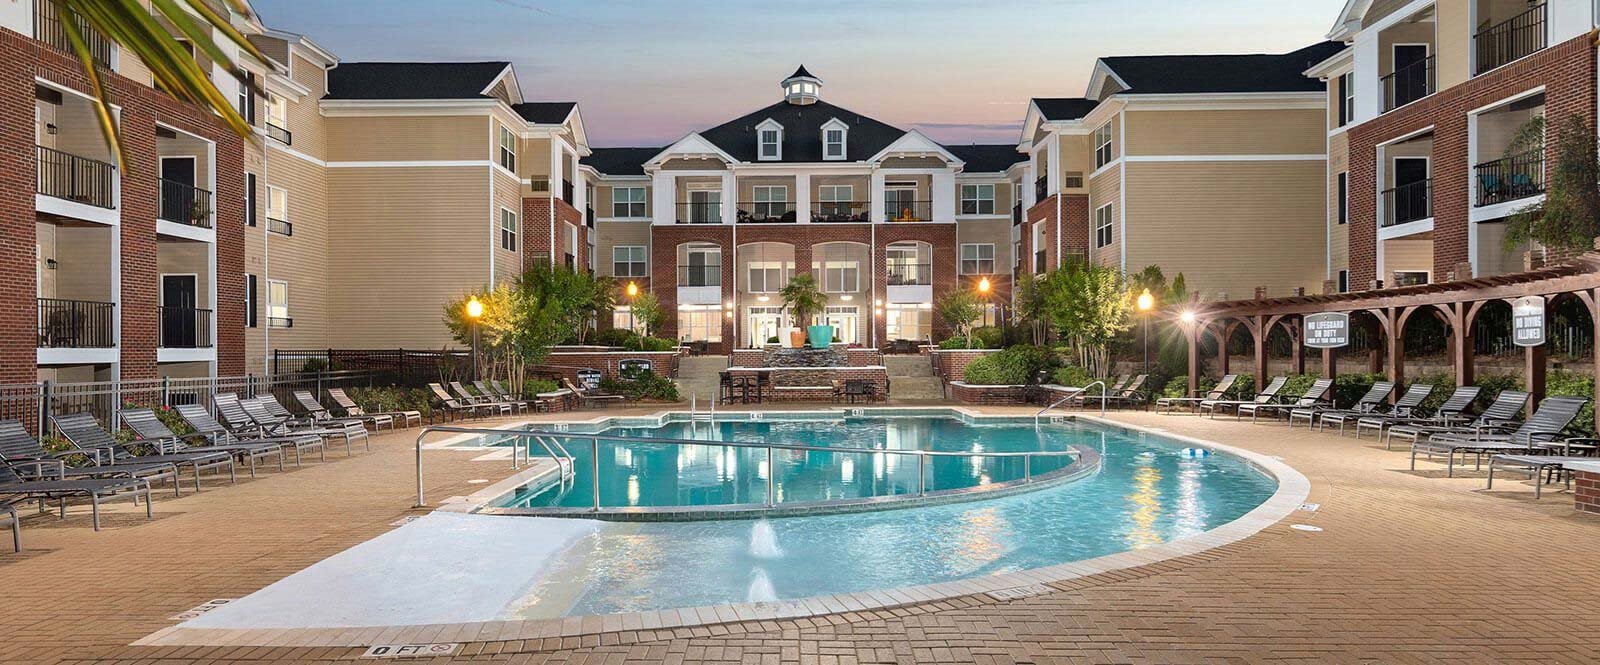 Invigorating Zero Entry Pool at Abberly Village Apartment Homes by HHHunt, West Columbia, SC